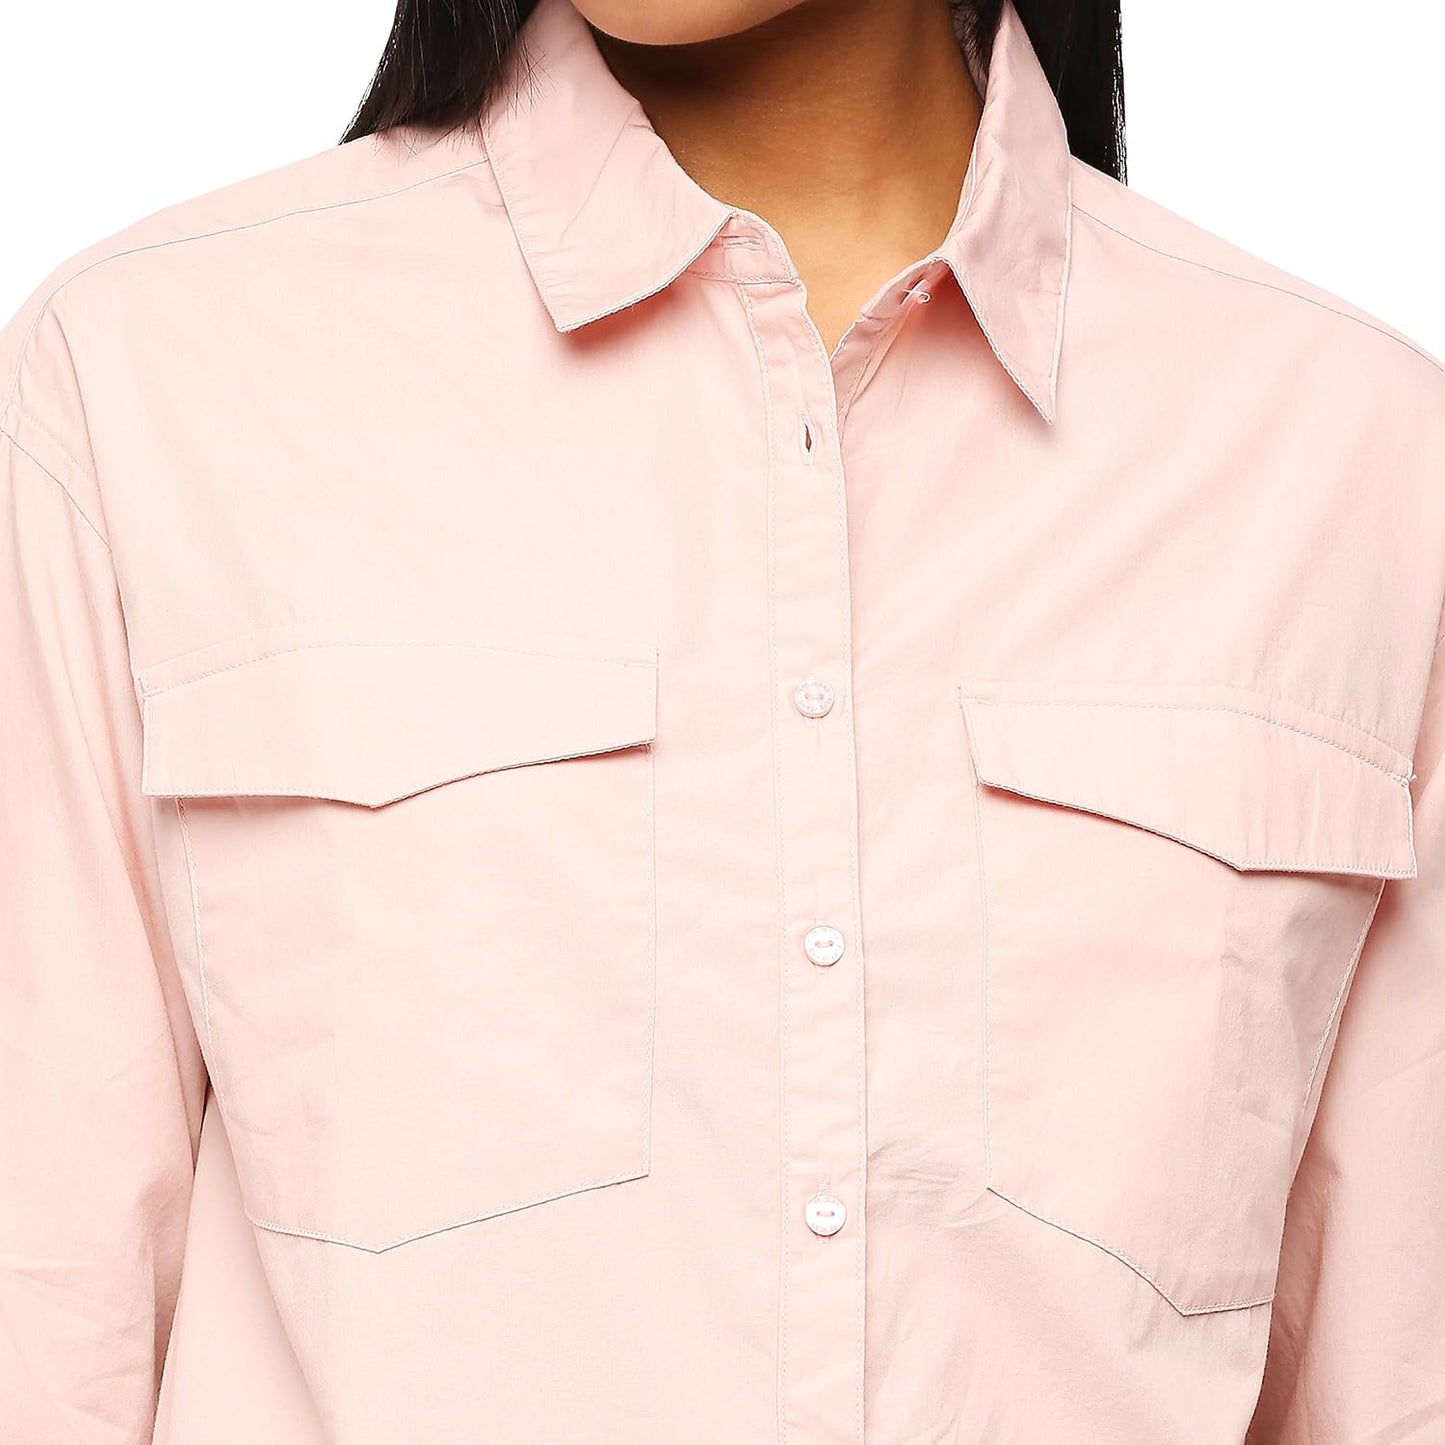 Pepe Jeans Women's Oversized Fit Shirt (PL304740_Soft Pink